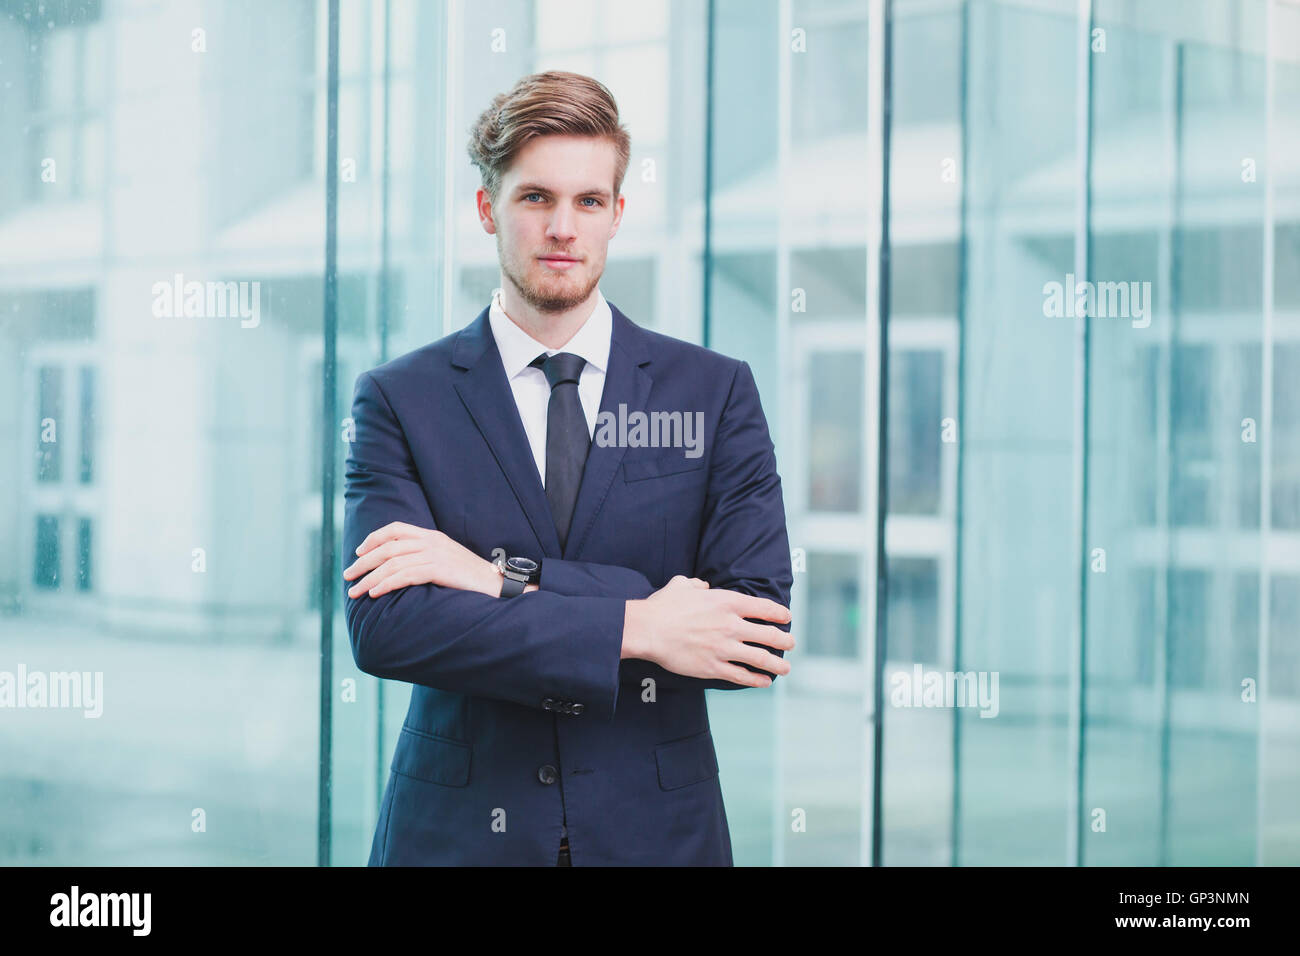 portrait of young successful businessman, career opportunity background Stock Photo